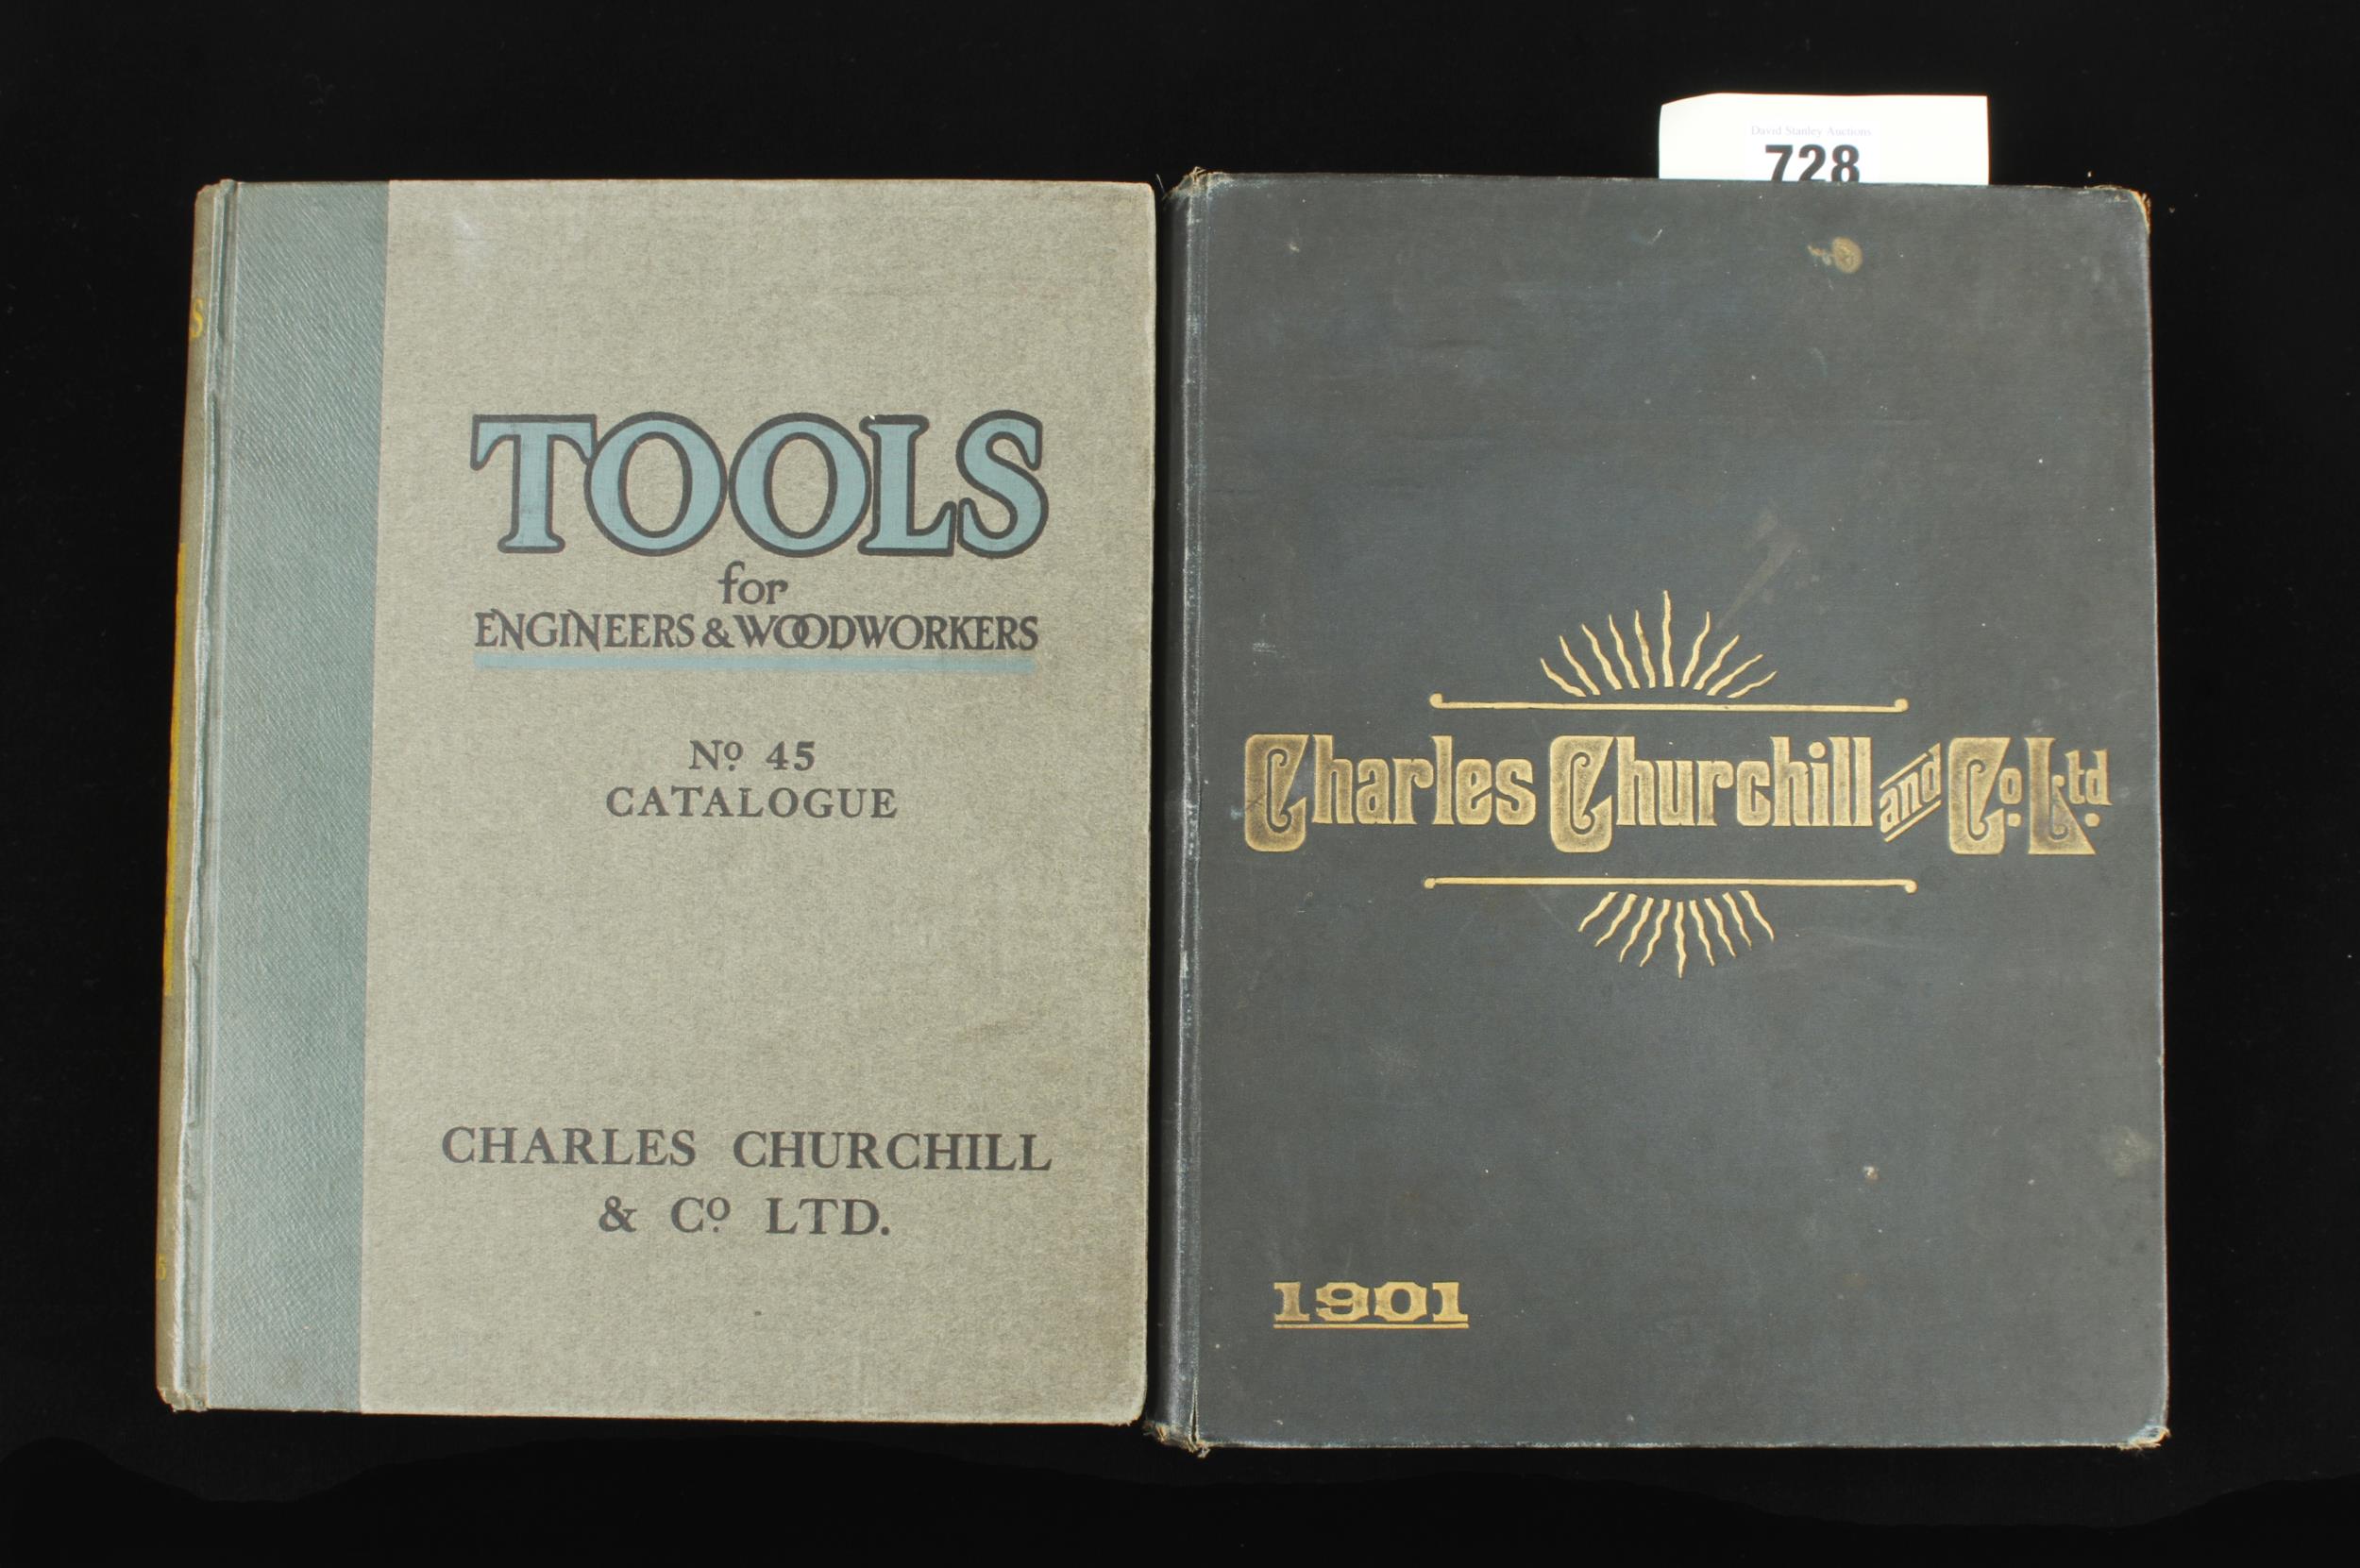 Charles Churchill; 1901 Ill cat with prices, woodworking and engineering machinery 368pp and another